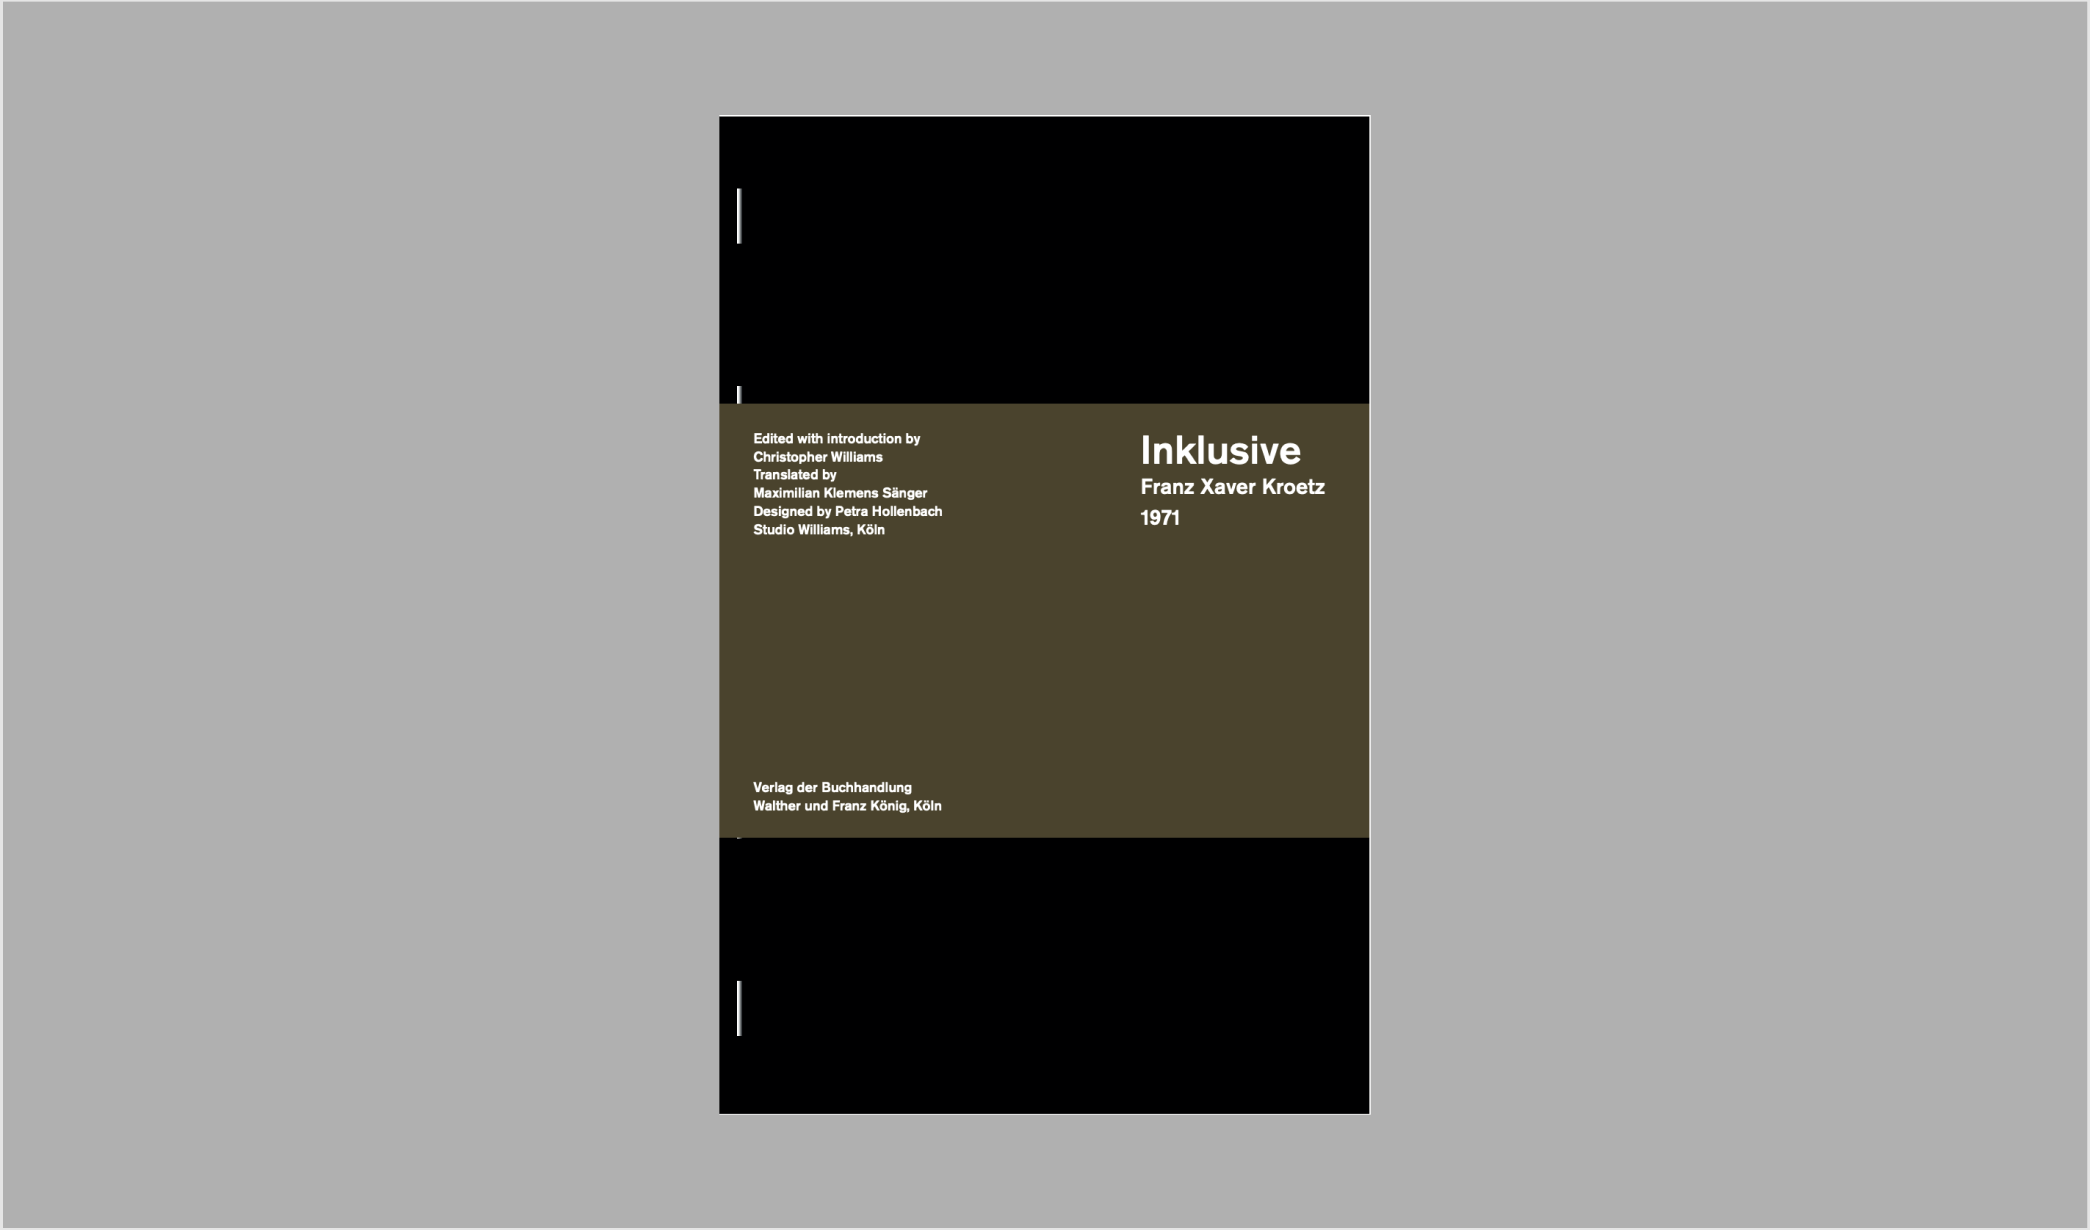 A book by Christopher Williams called Inklusive, dated 2021.